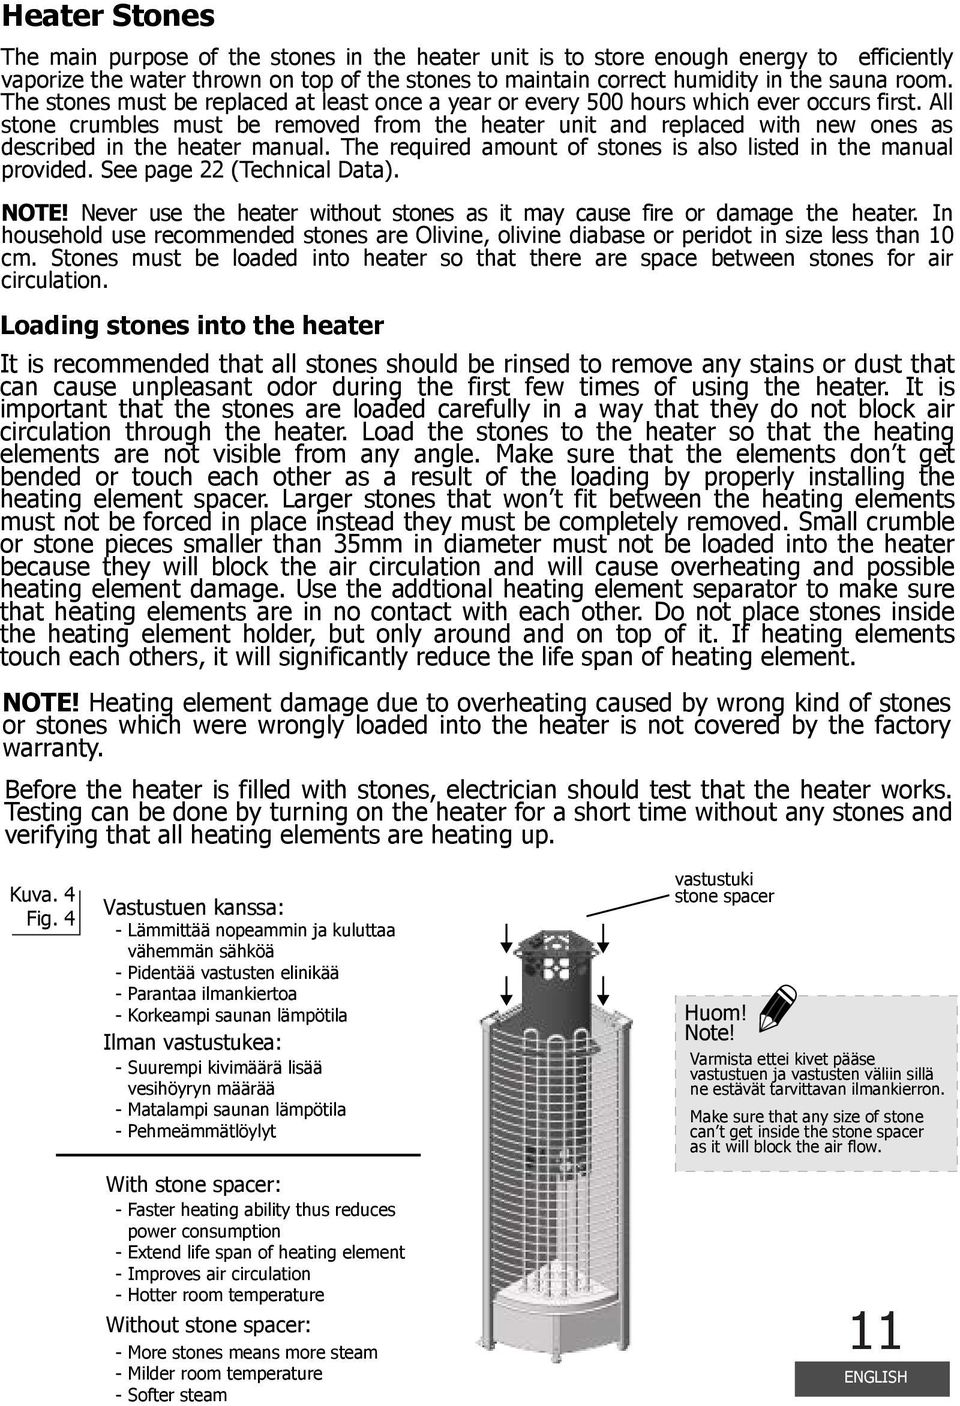 All stone crumbles must be removed from the heater unit and replaced with new ones as described in the heater manual. The required amount of stones is also listed in the manual provided.